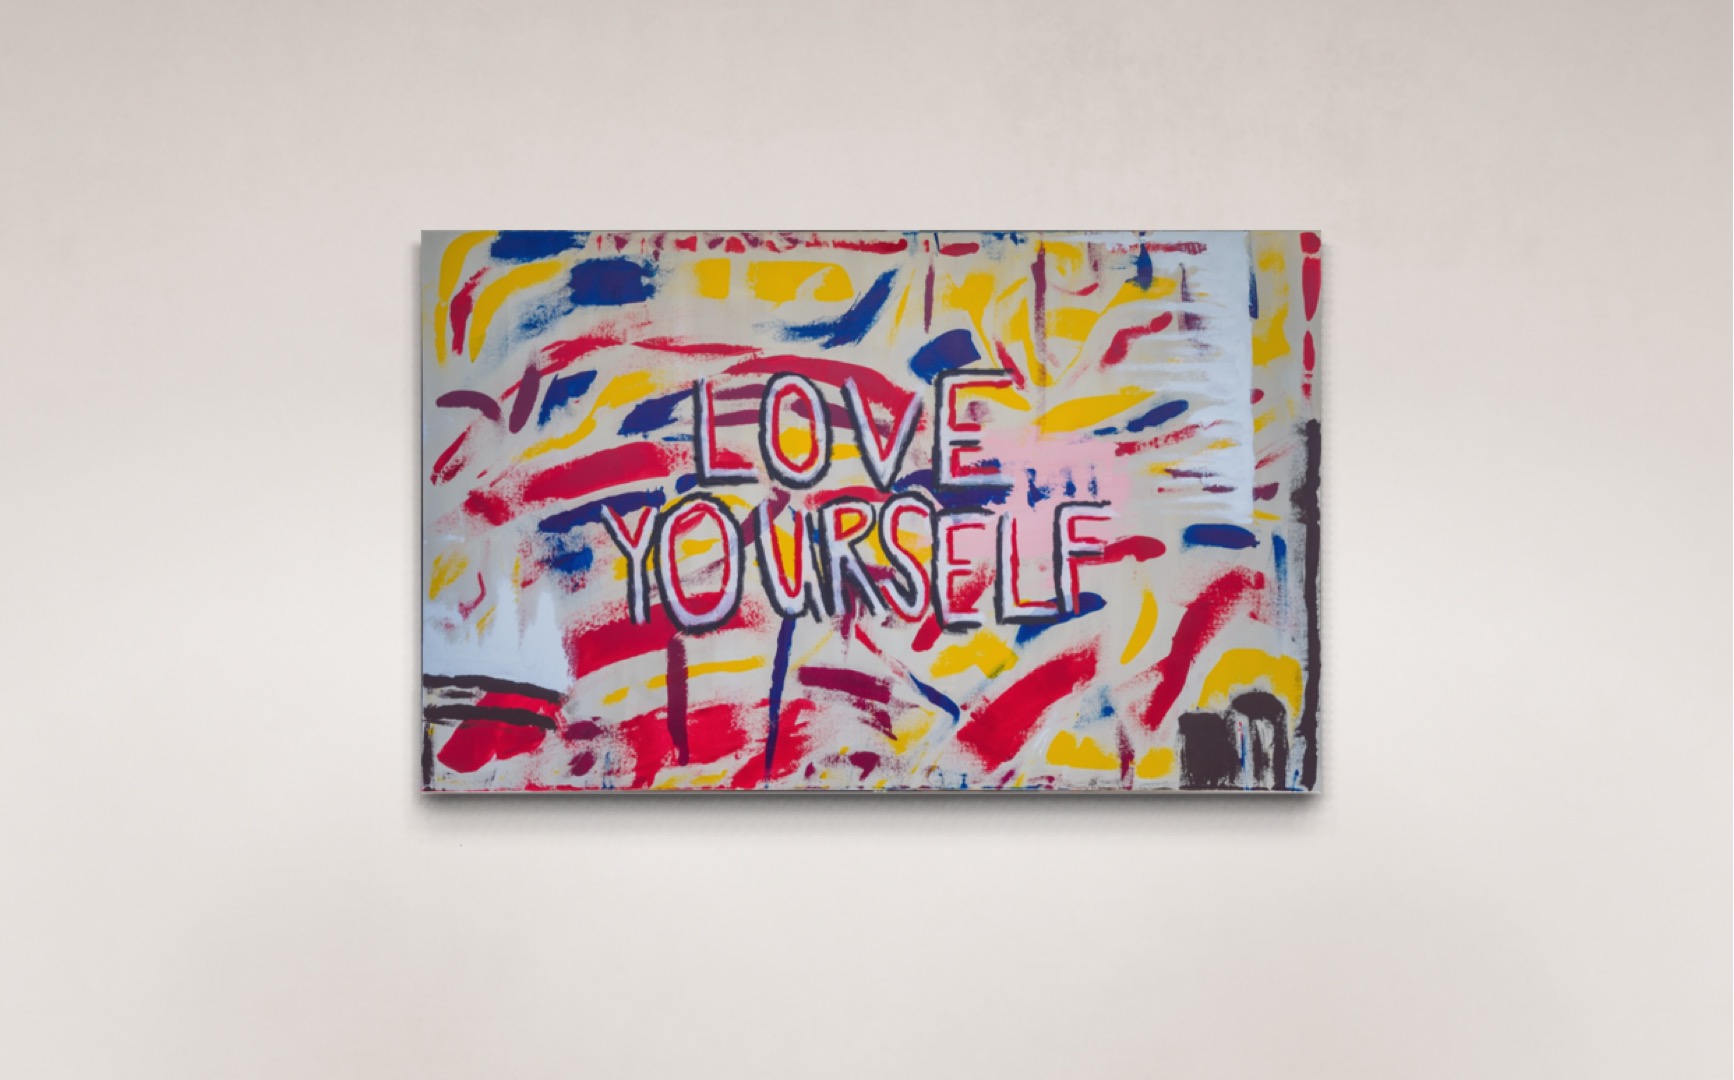 Love Yourself acrylic on canvas with oil stick art for sale by Uzoma Obasi Uzoma Obasi | Abstract Art | Fine Art Prints | Cool Art